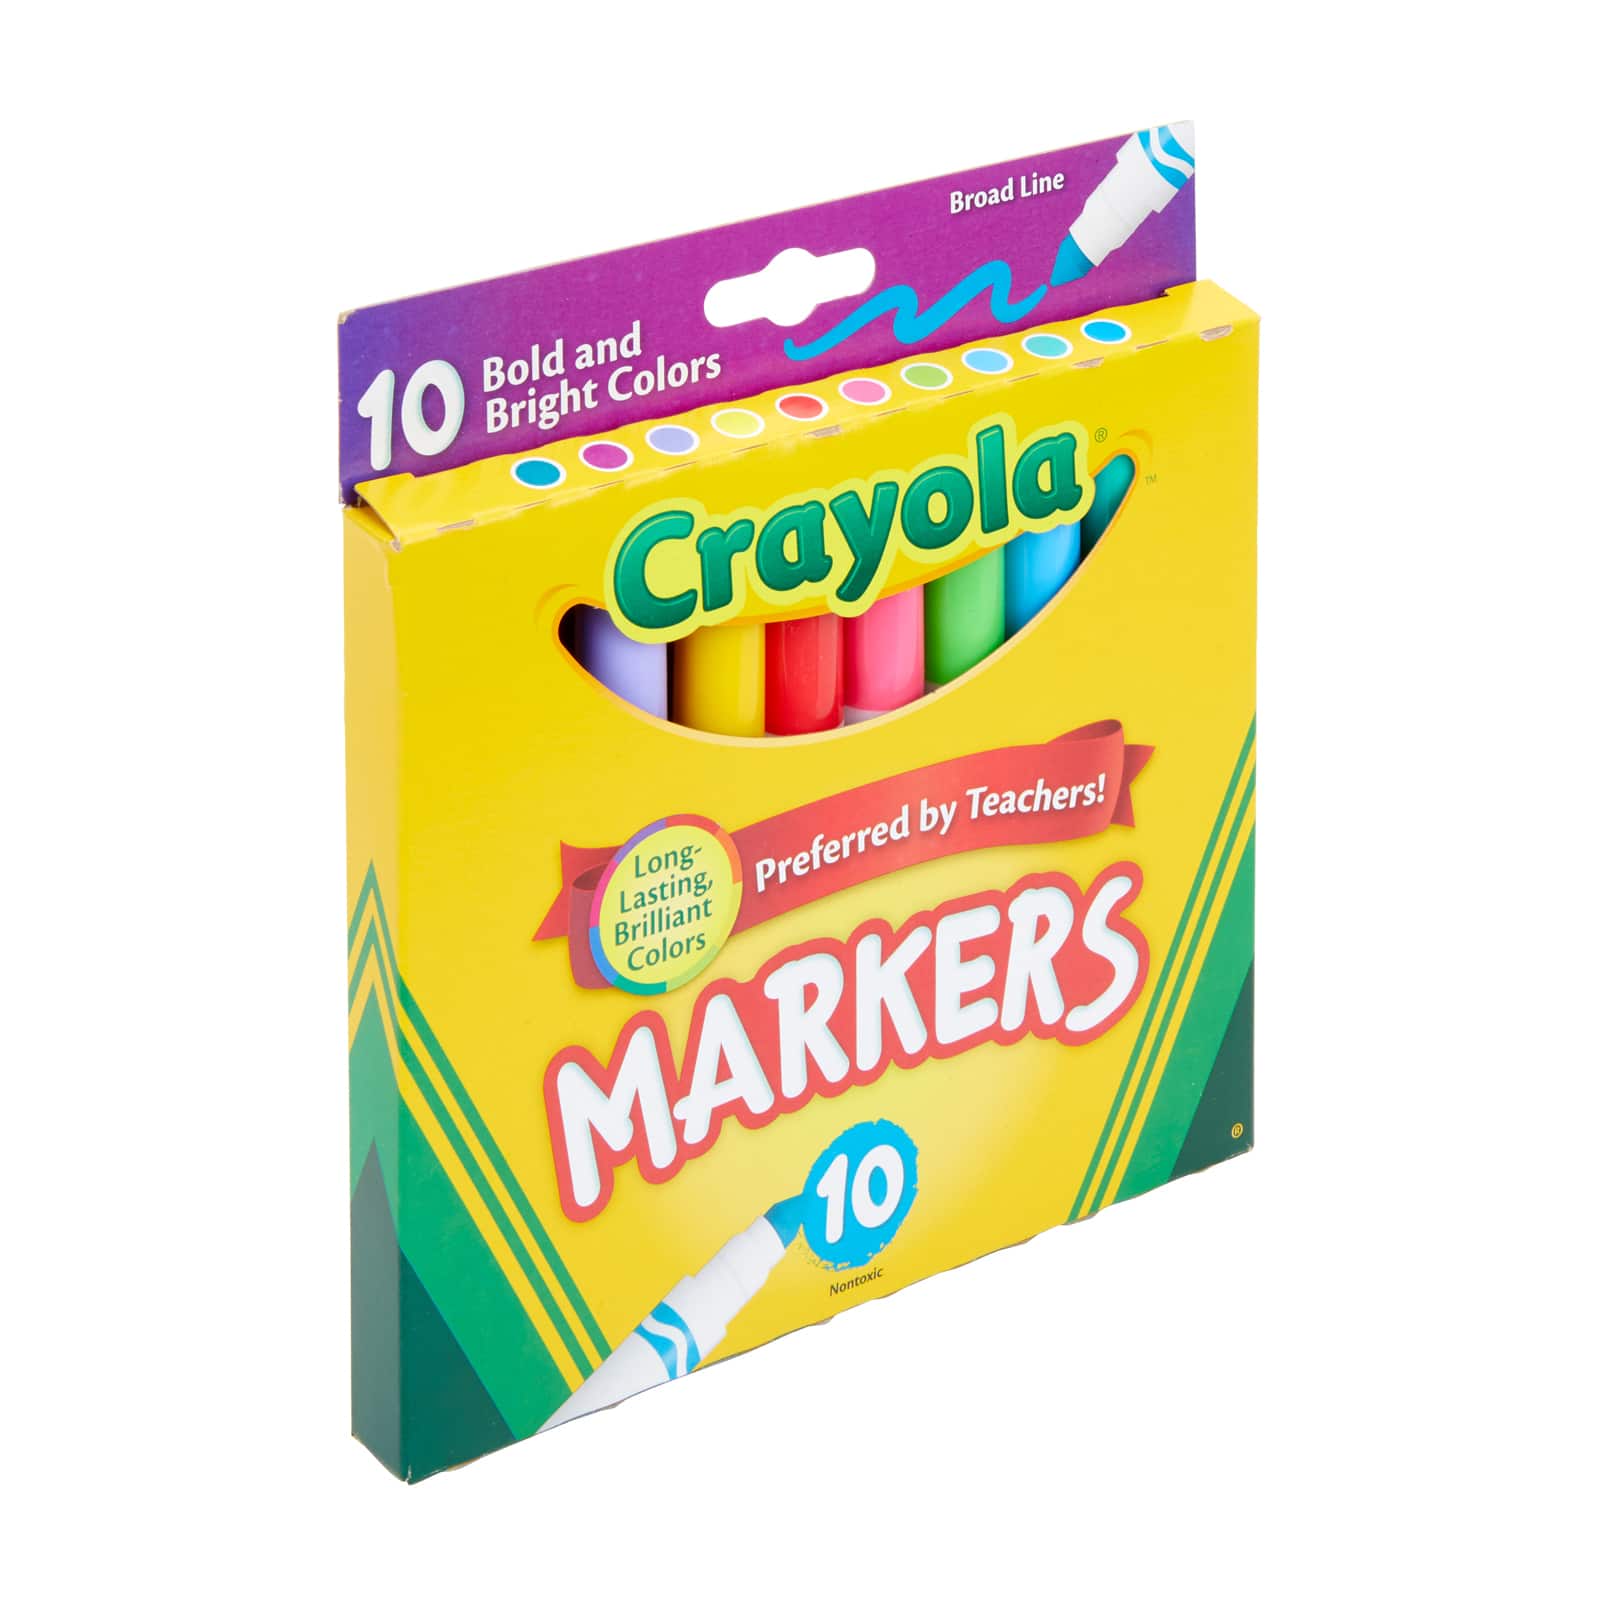 Up To 20% Off on Crayola Fabric Markers (10-Ct.)